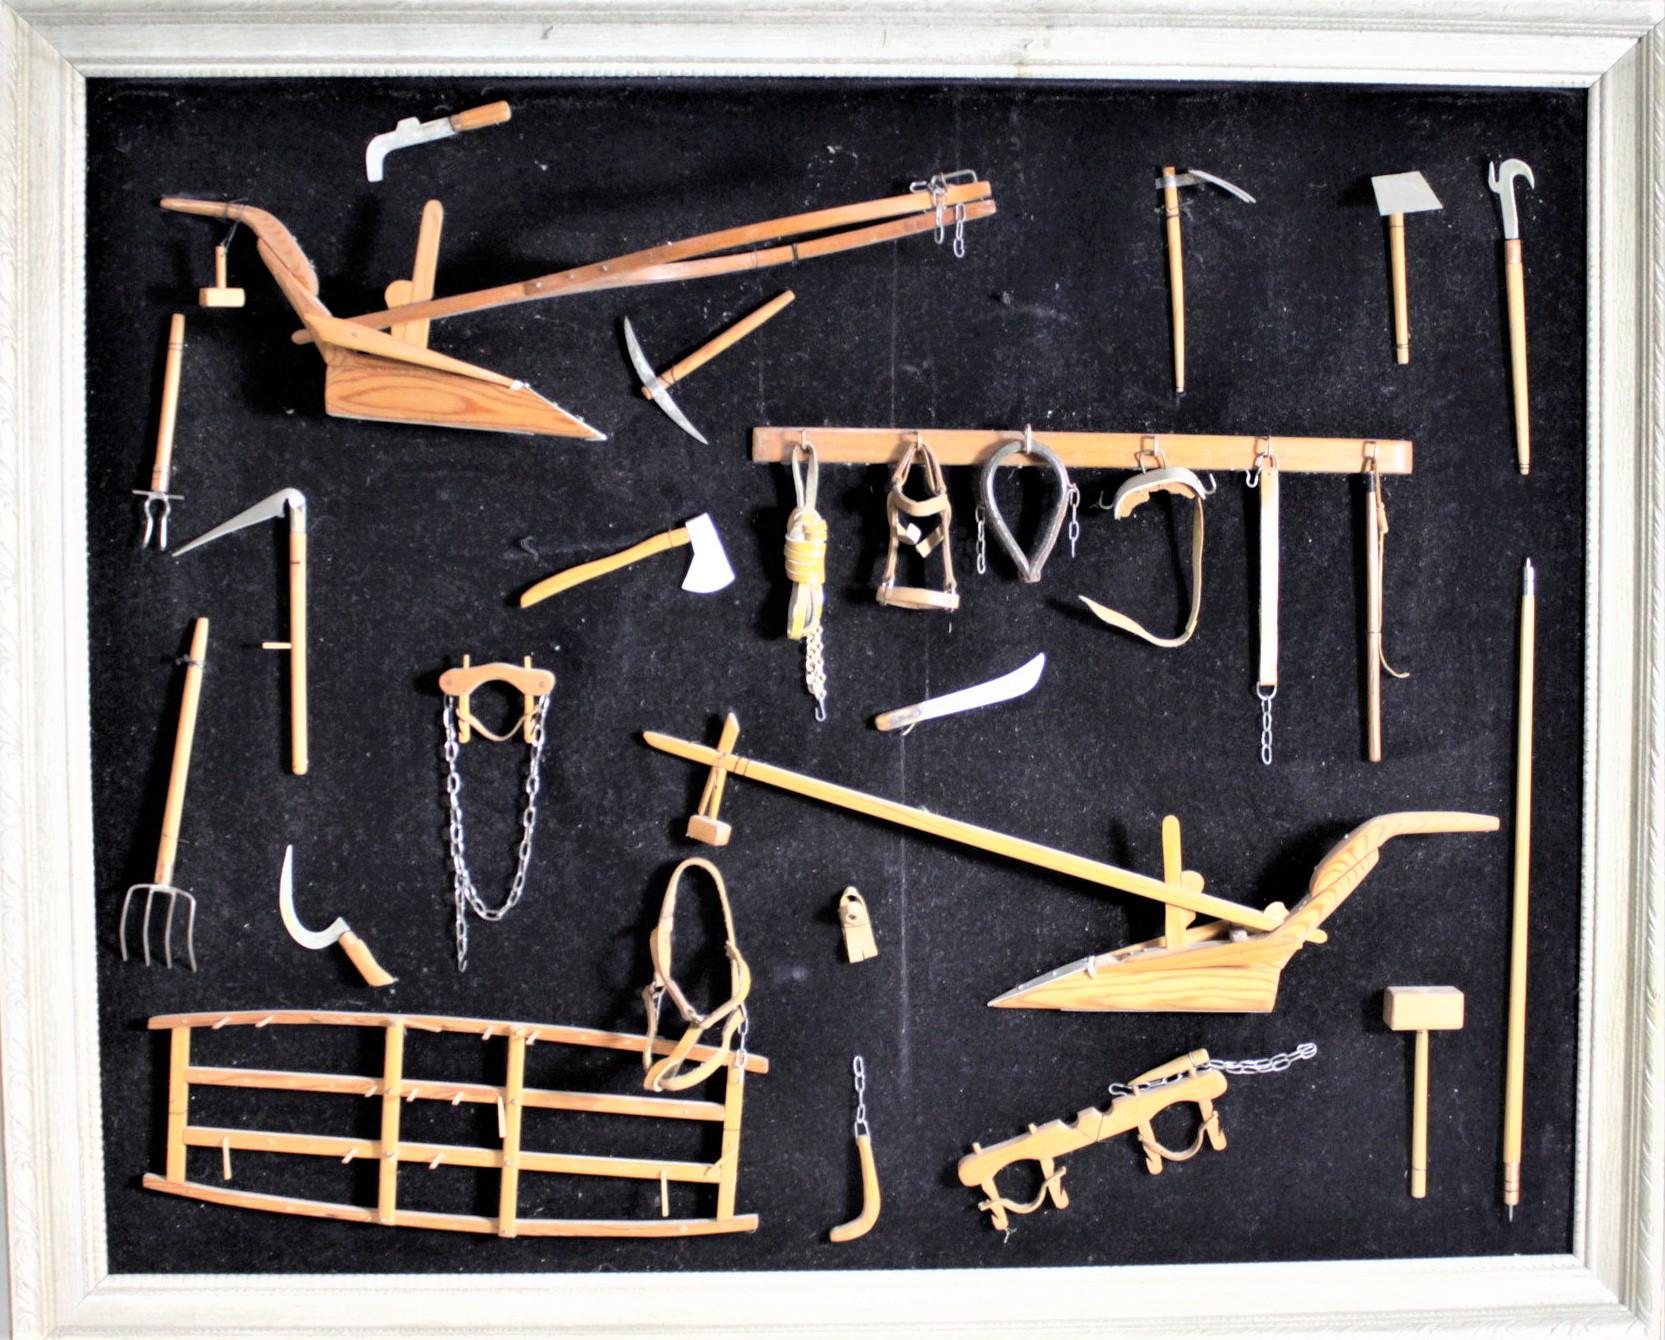 This framed collection of over two dozen handcrafted miniature antique farm implements are all unsigned, but presumed to have been made in Canada in circa 1969 in a Folk Art style. The implements are hand carved and handcrafted of wood and leather